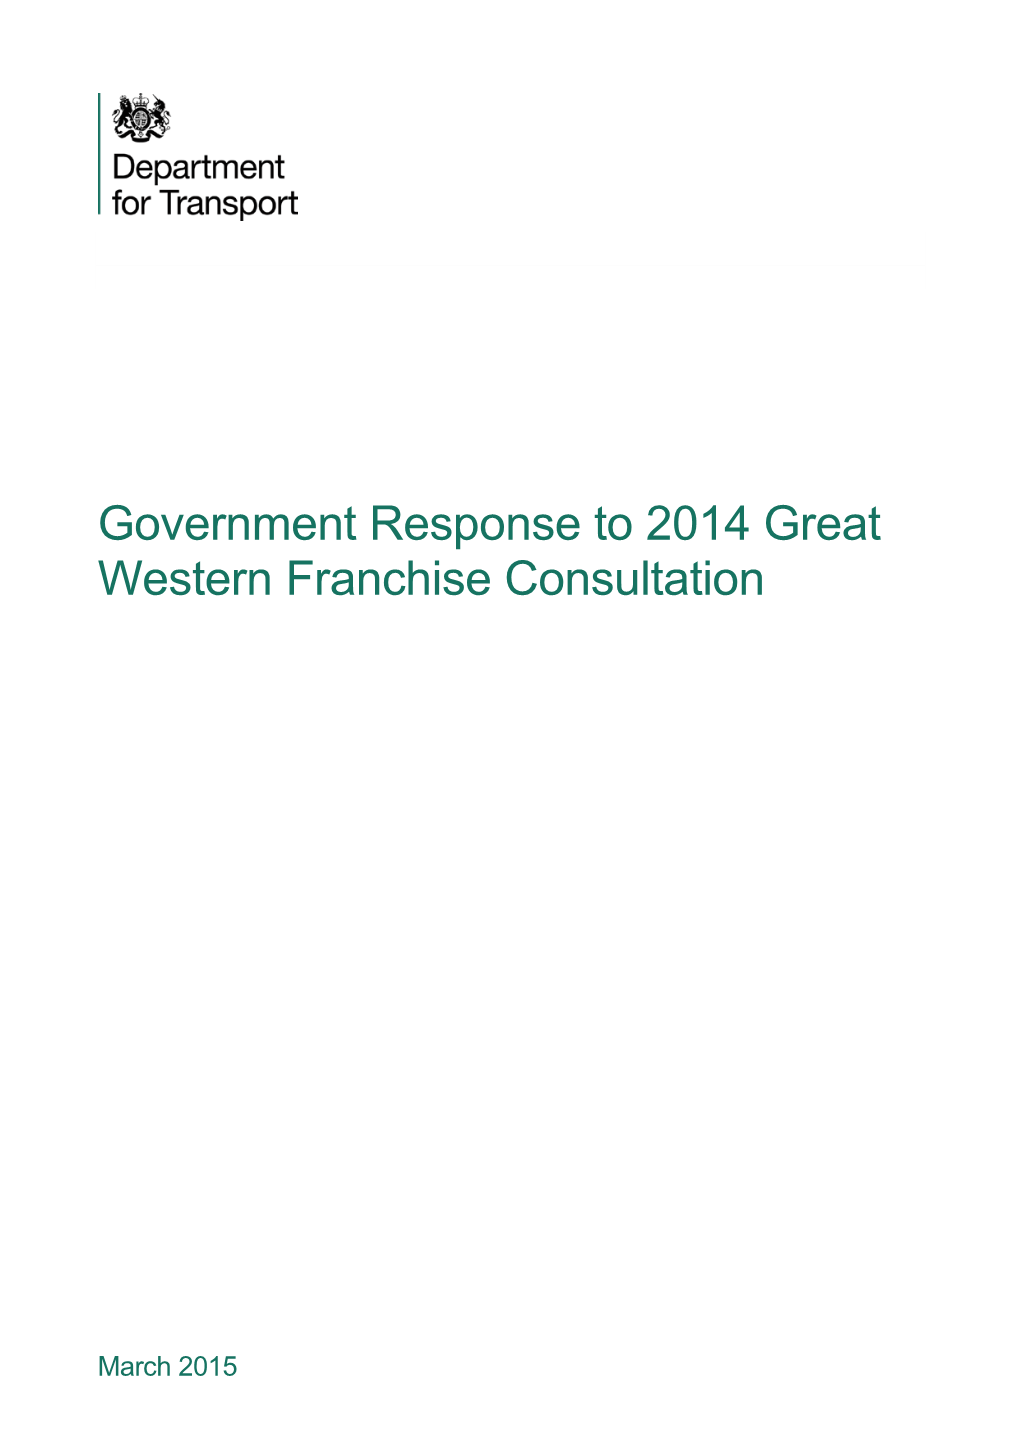 Government Response to 2014 Great Western Franchise Consultation